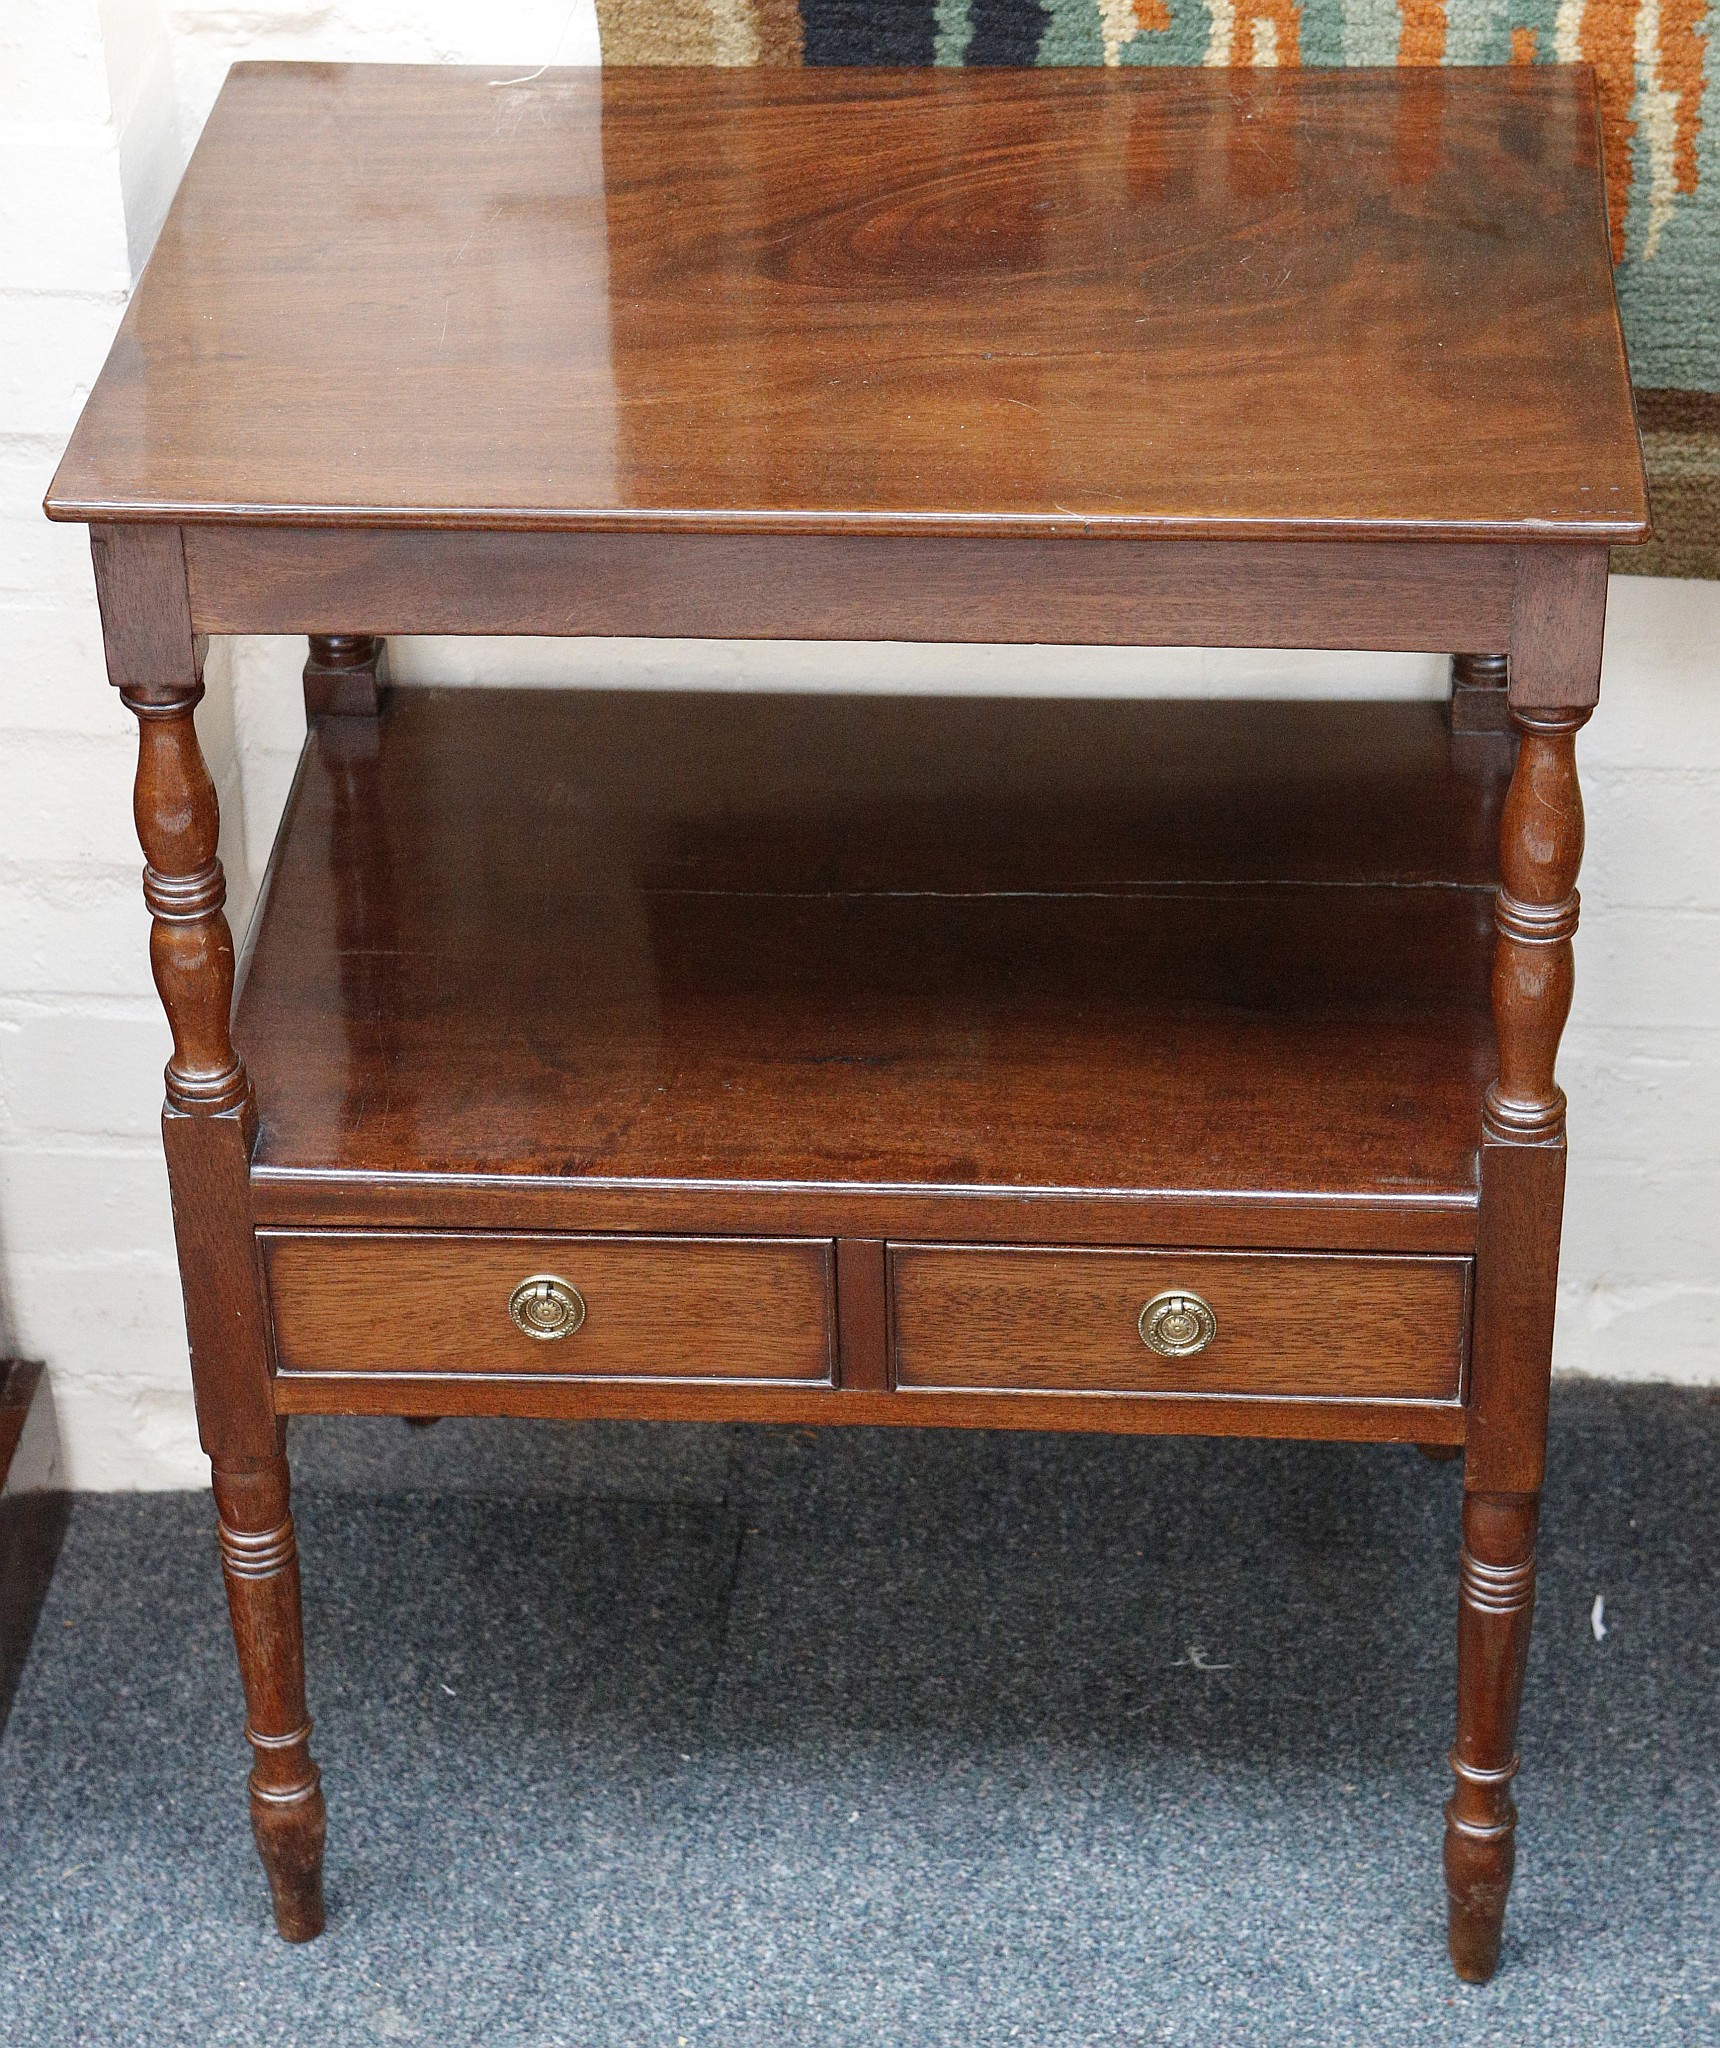 A 19th century mahogany what-not, with two tiers and two drawers (cut-down), on turned legs, 60cm